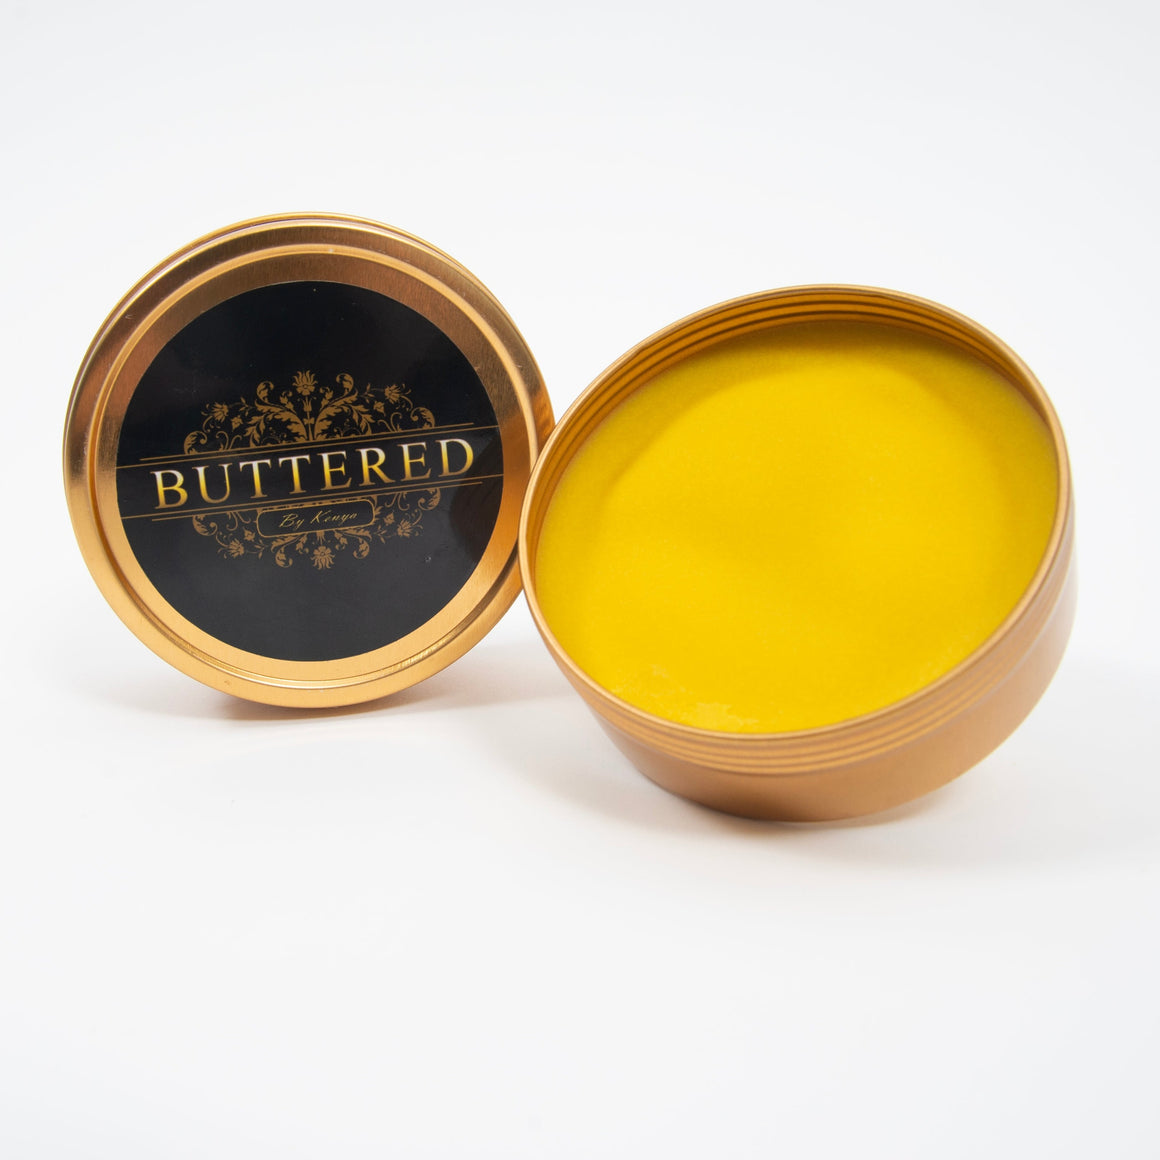 Handcrafted Body Butter